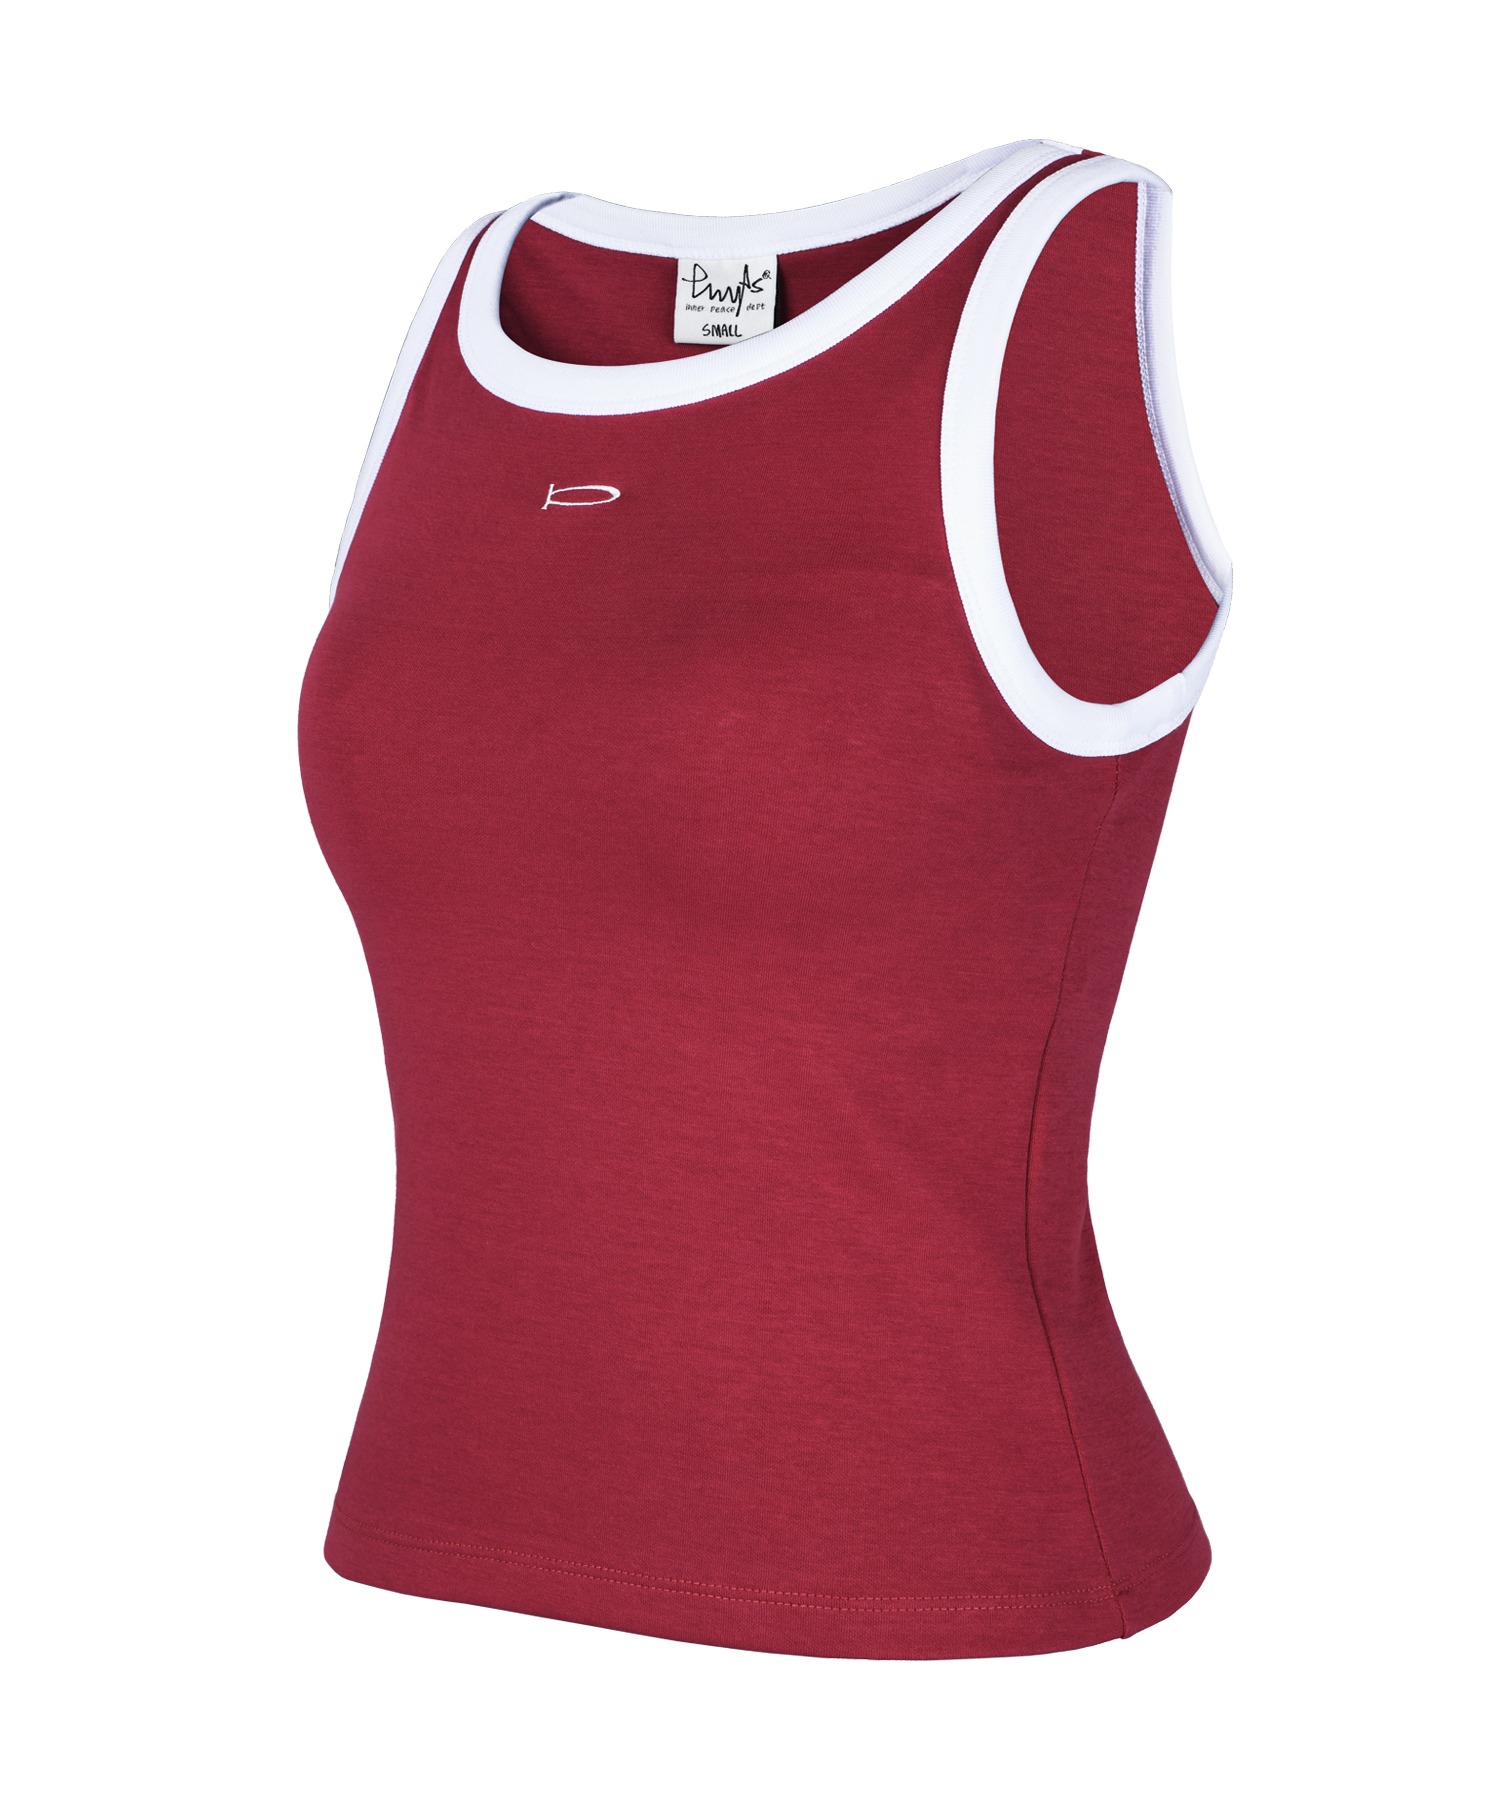 [WOMENS] SPORTS BRA TOP PINK RED